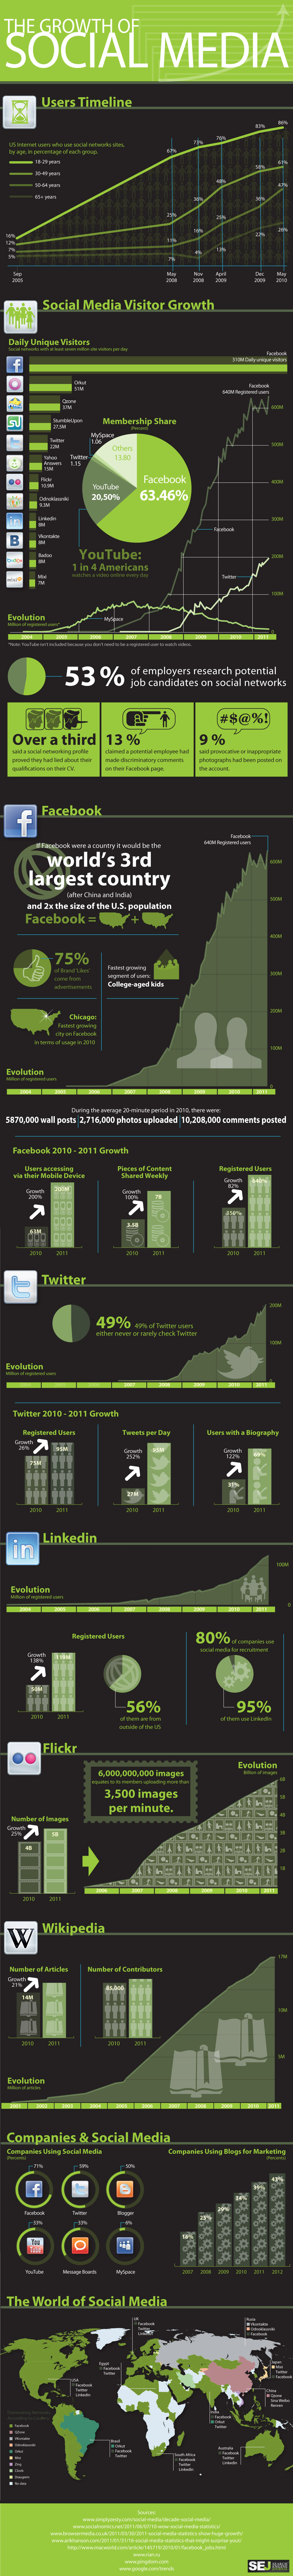 Social Media Growth Infographic